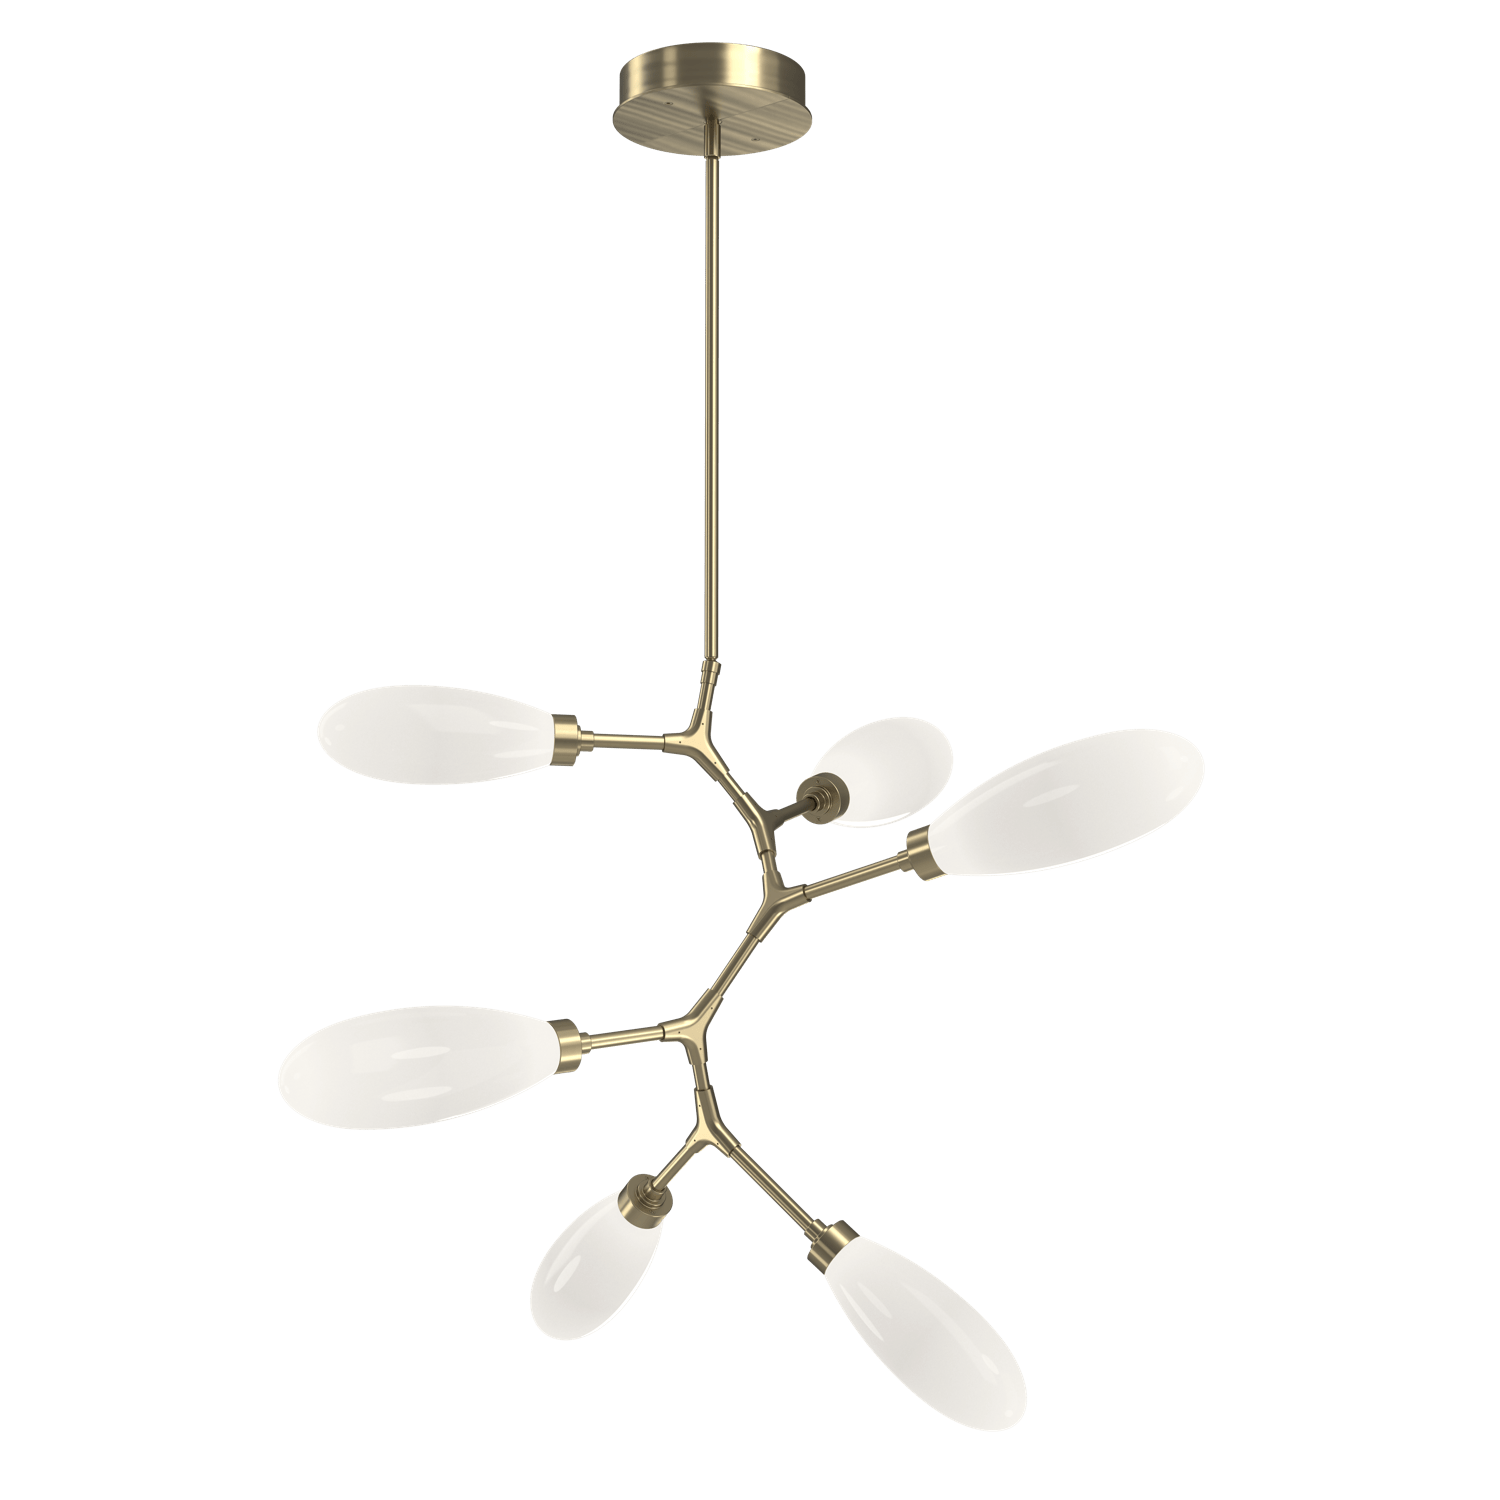 CHB0071-VA-HB-WL-LL-Hammerton-Studio-Fiori-6-light-organic-vine-chandelier-with-heritage-brass-finish-and-opal-white-glass-shades-and-LED-lamping